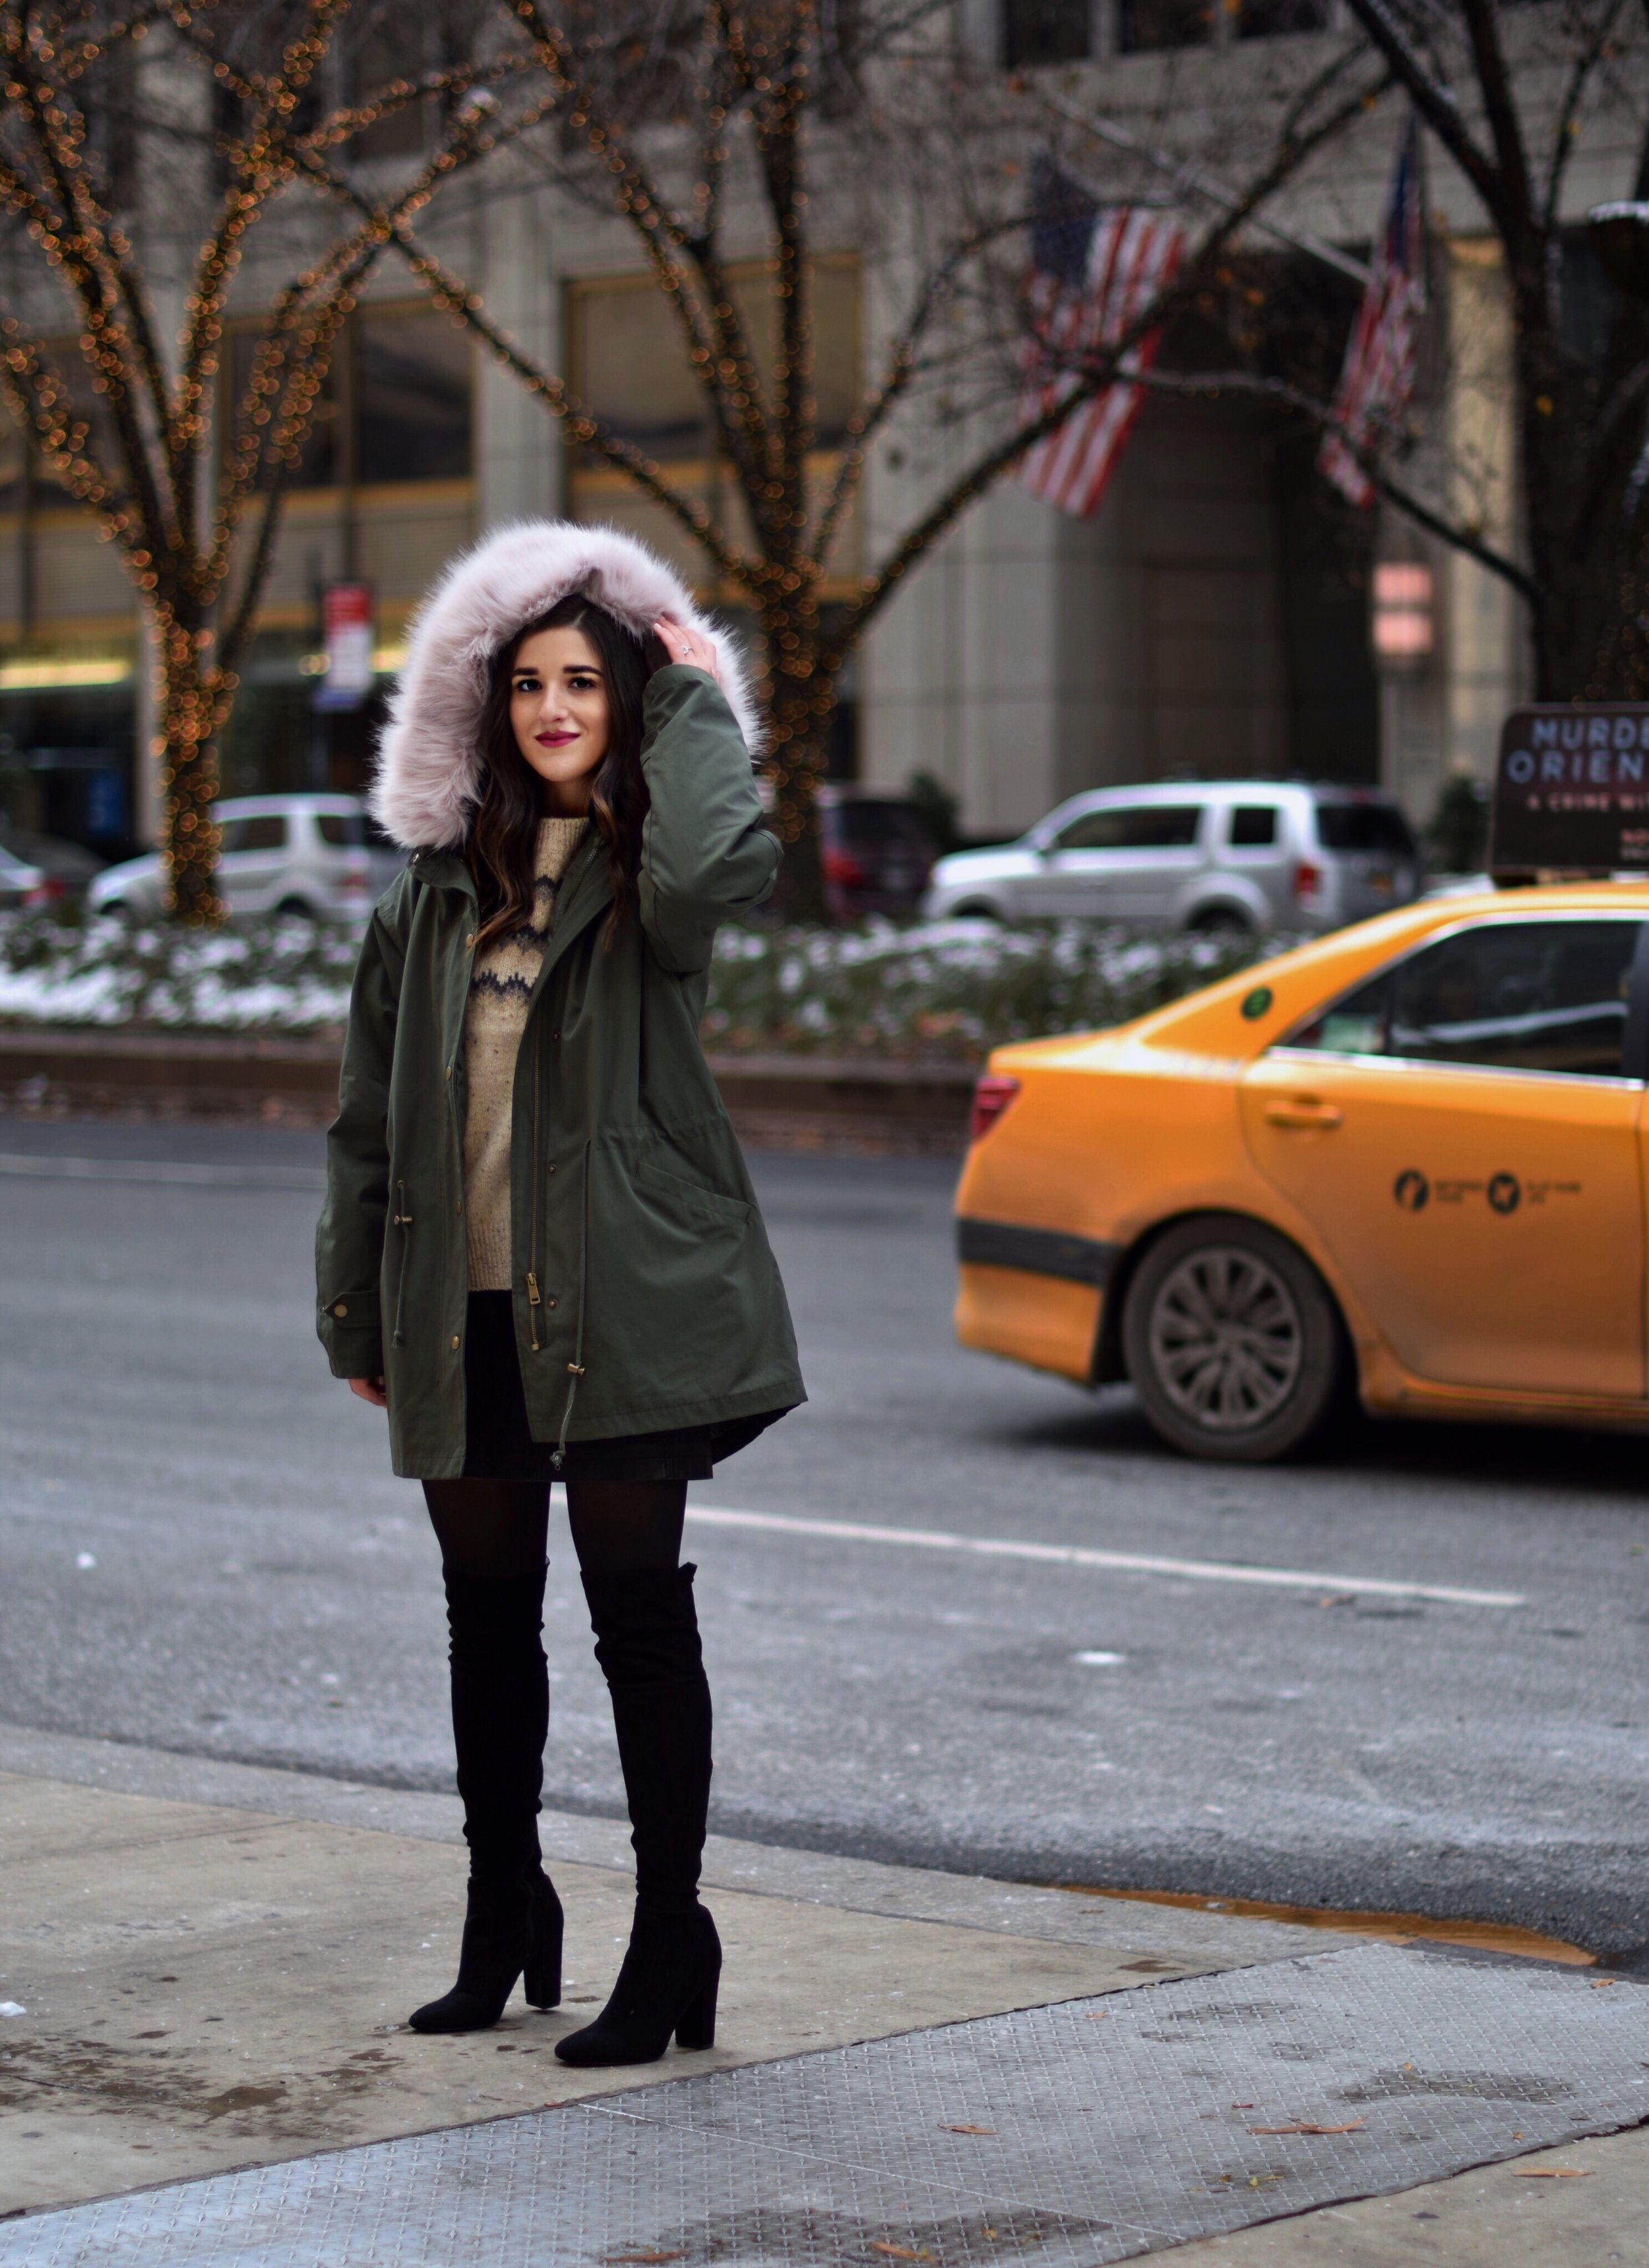 The Perfect Parka 10 Coats To Gift This Season Esther Santer Fashion Blog NYC Street Style Blogger Outfit OOTD Trendy Urban Outfitters Jacket Coat Girl Women Fur Hood Winter Black OTK Boots Cashmere Shopping Sweater Shoes Cold Weather Holiday Presents.jpg